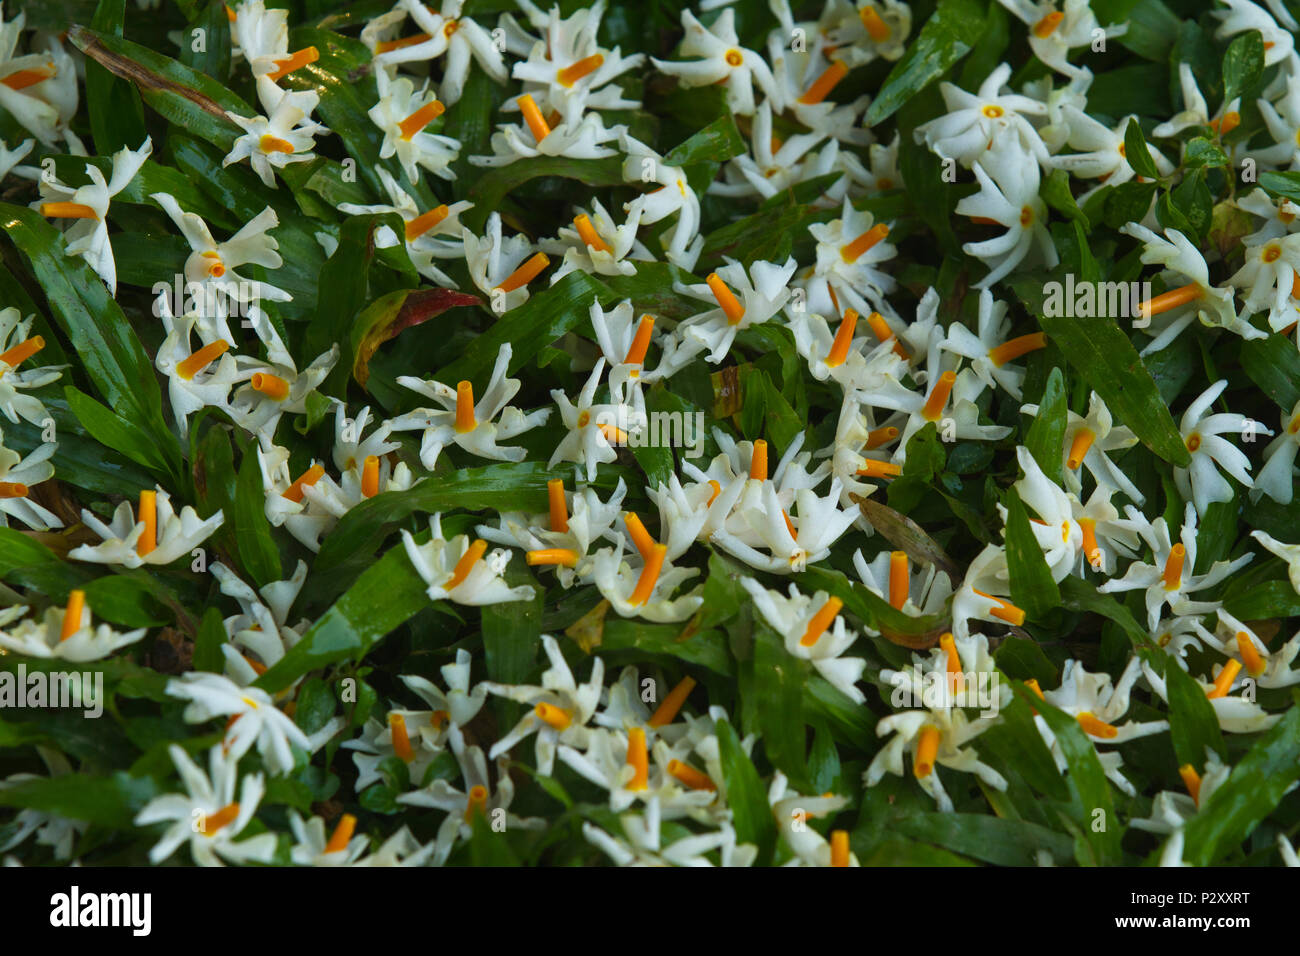 Nyctanthes arbor-tristis flowers commonly known as Shefali or Shiuli fallen on the grass of the Ramna Park in Dhaka, Bangladesh Stock Photo